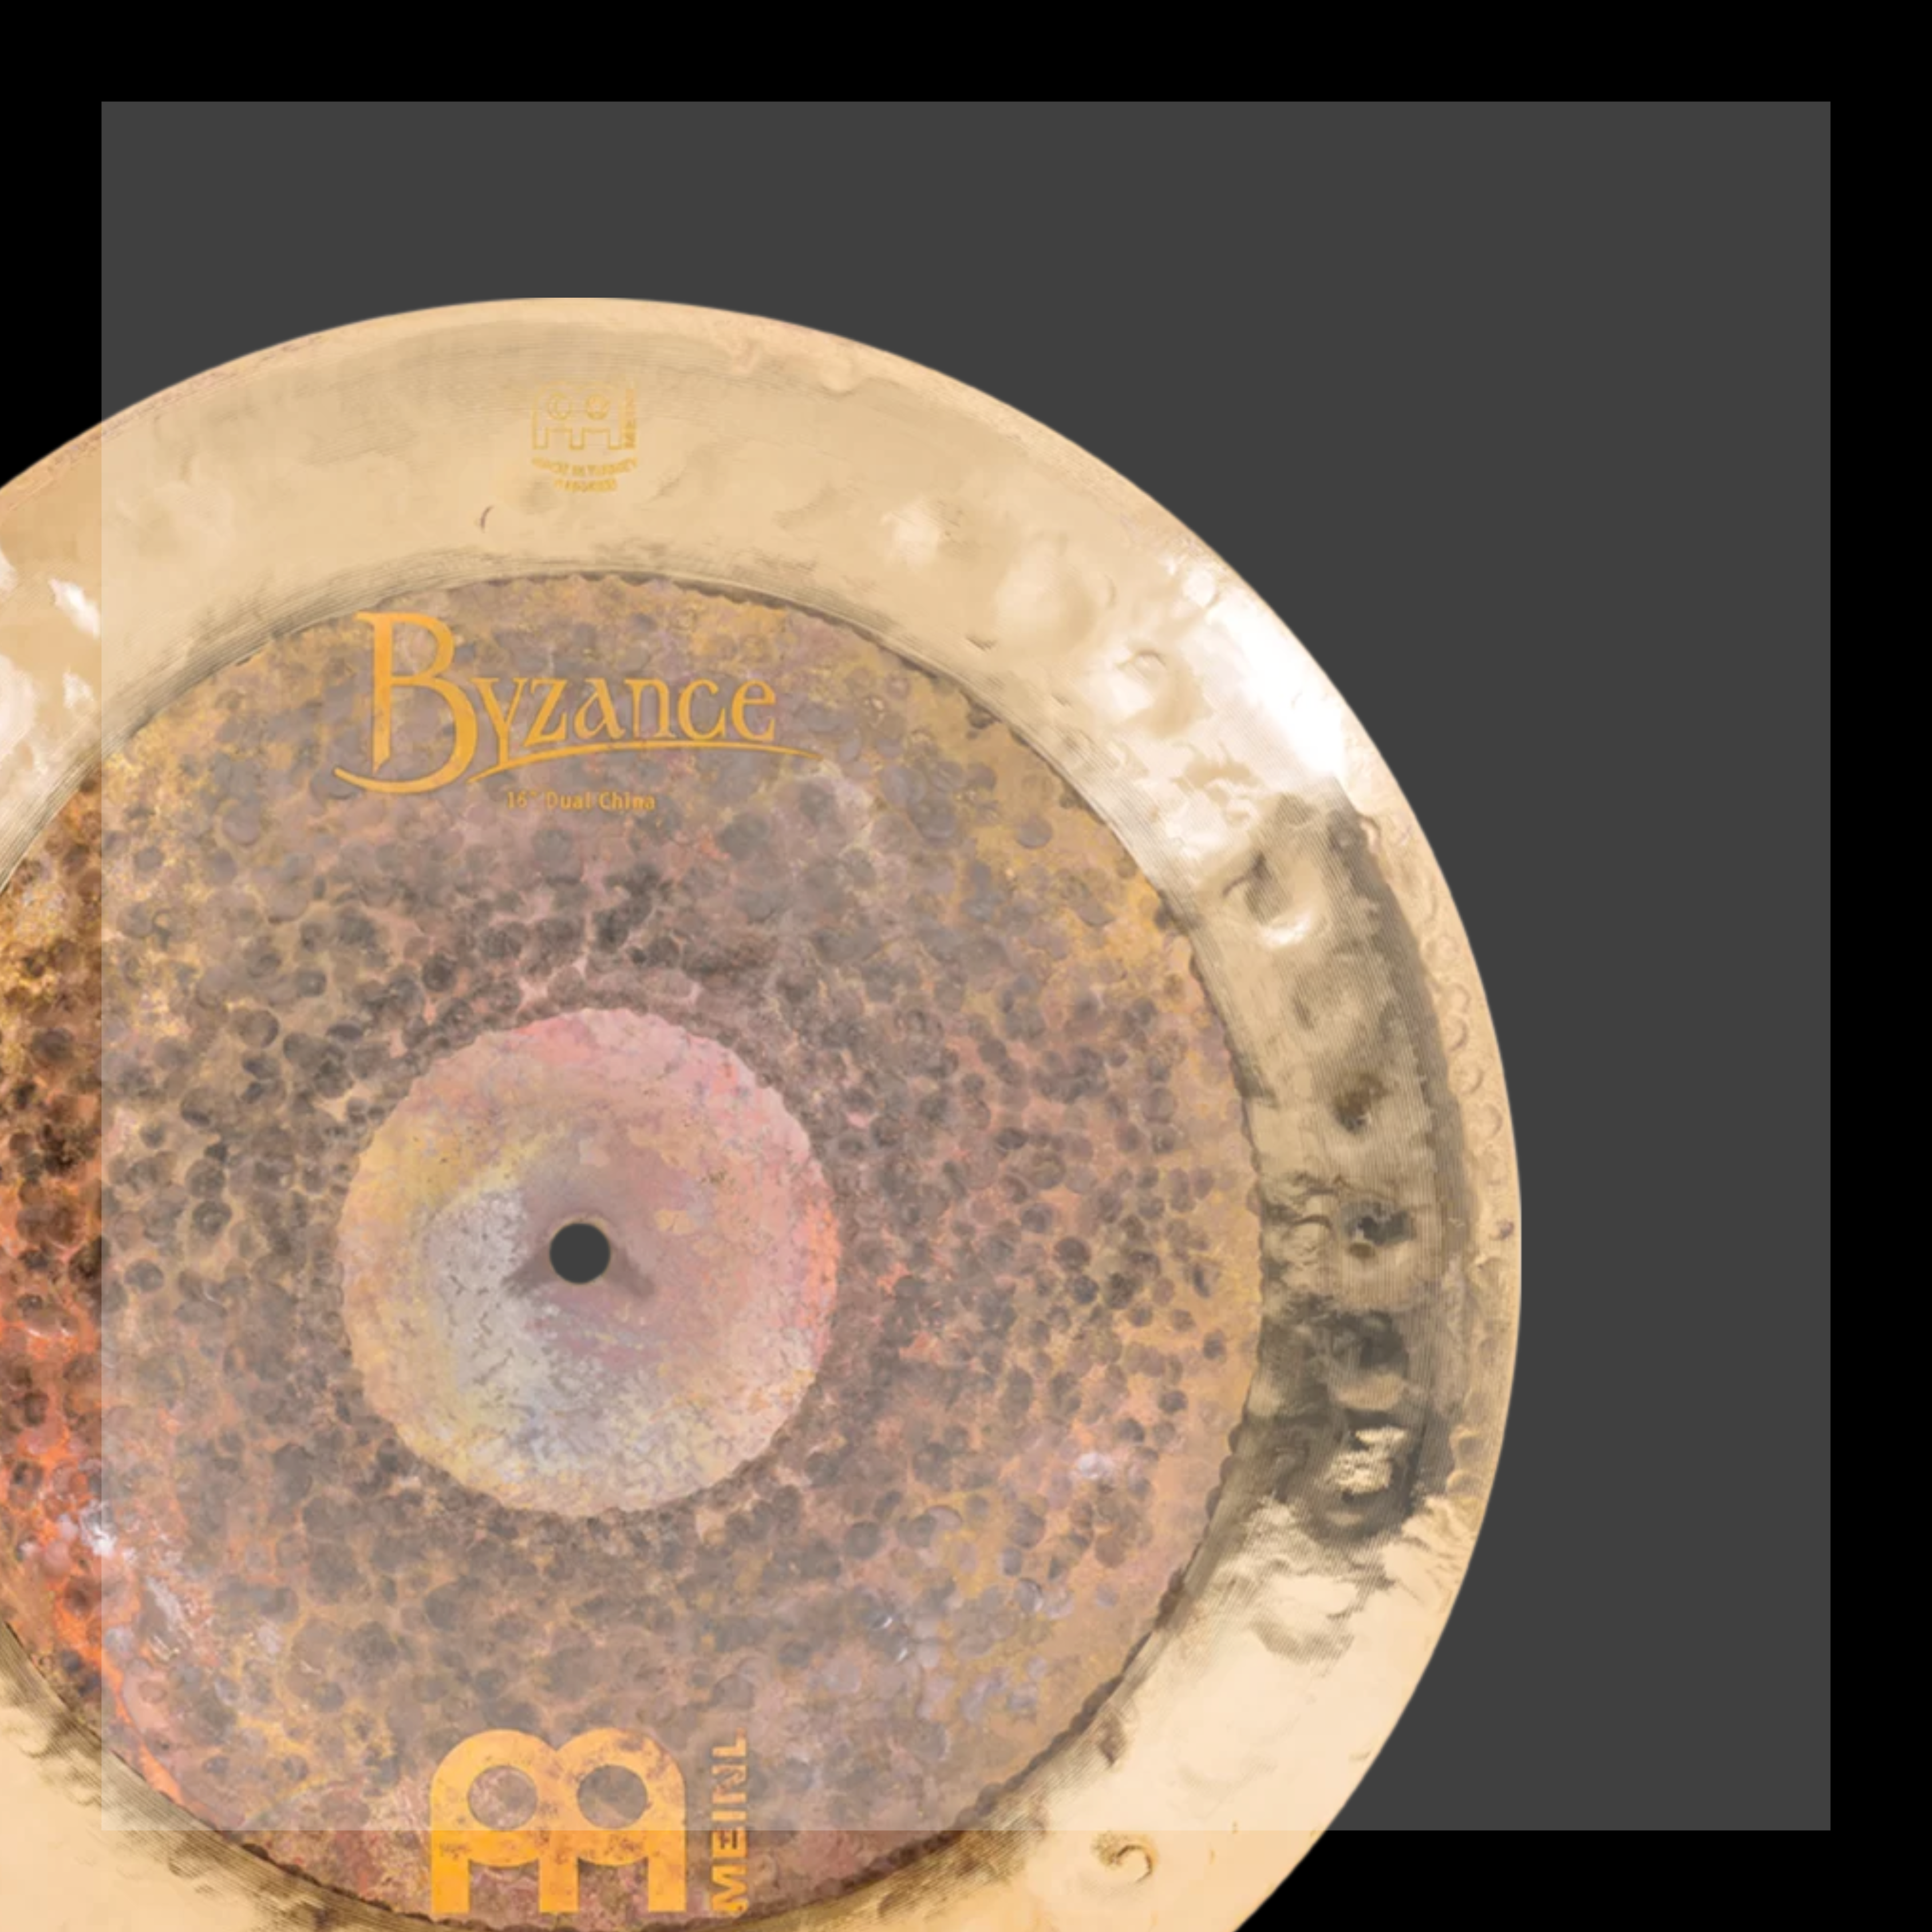 Byzance Dual Cymbals At Into Music – Into Music Store